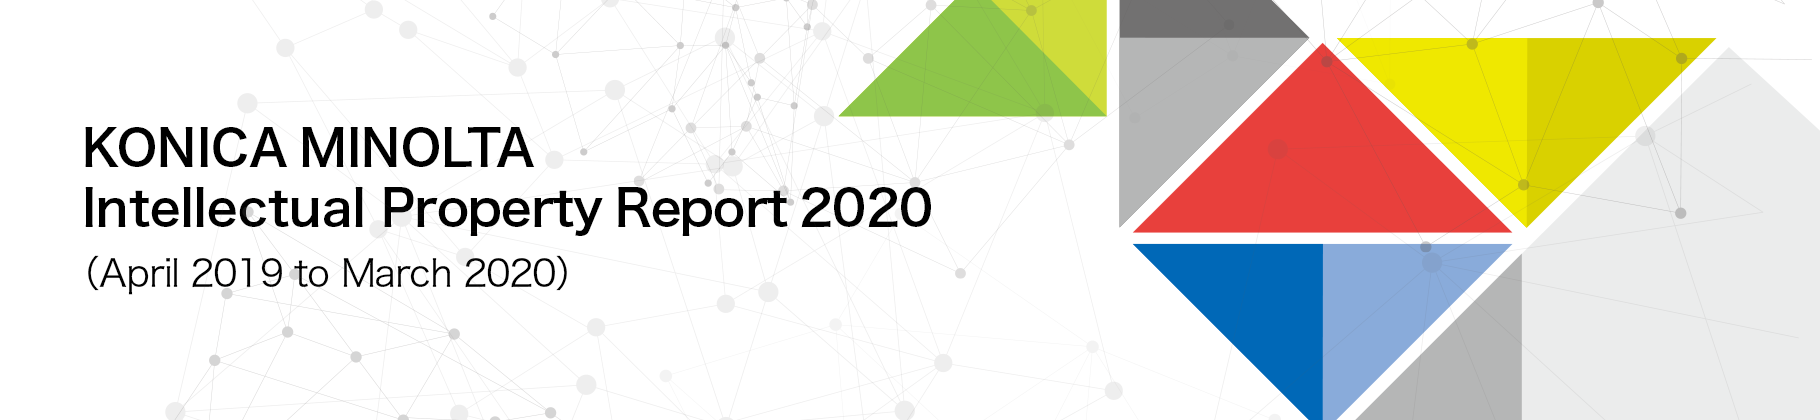 Intellectual Property Report 2020(April 2019 to March 2020)